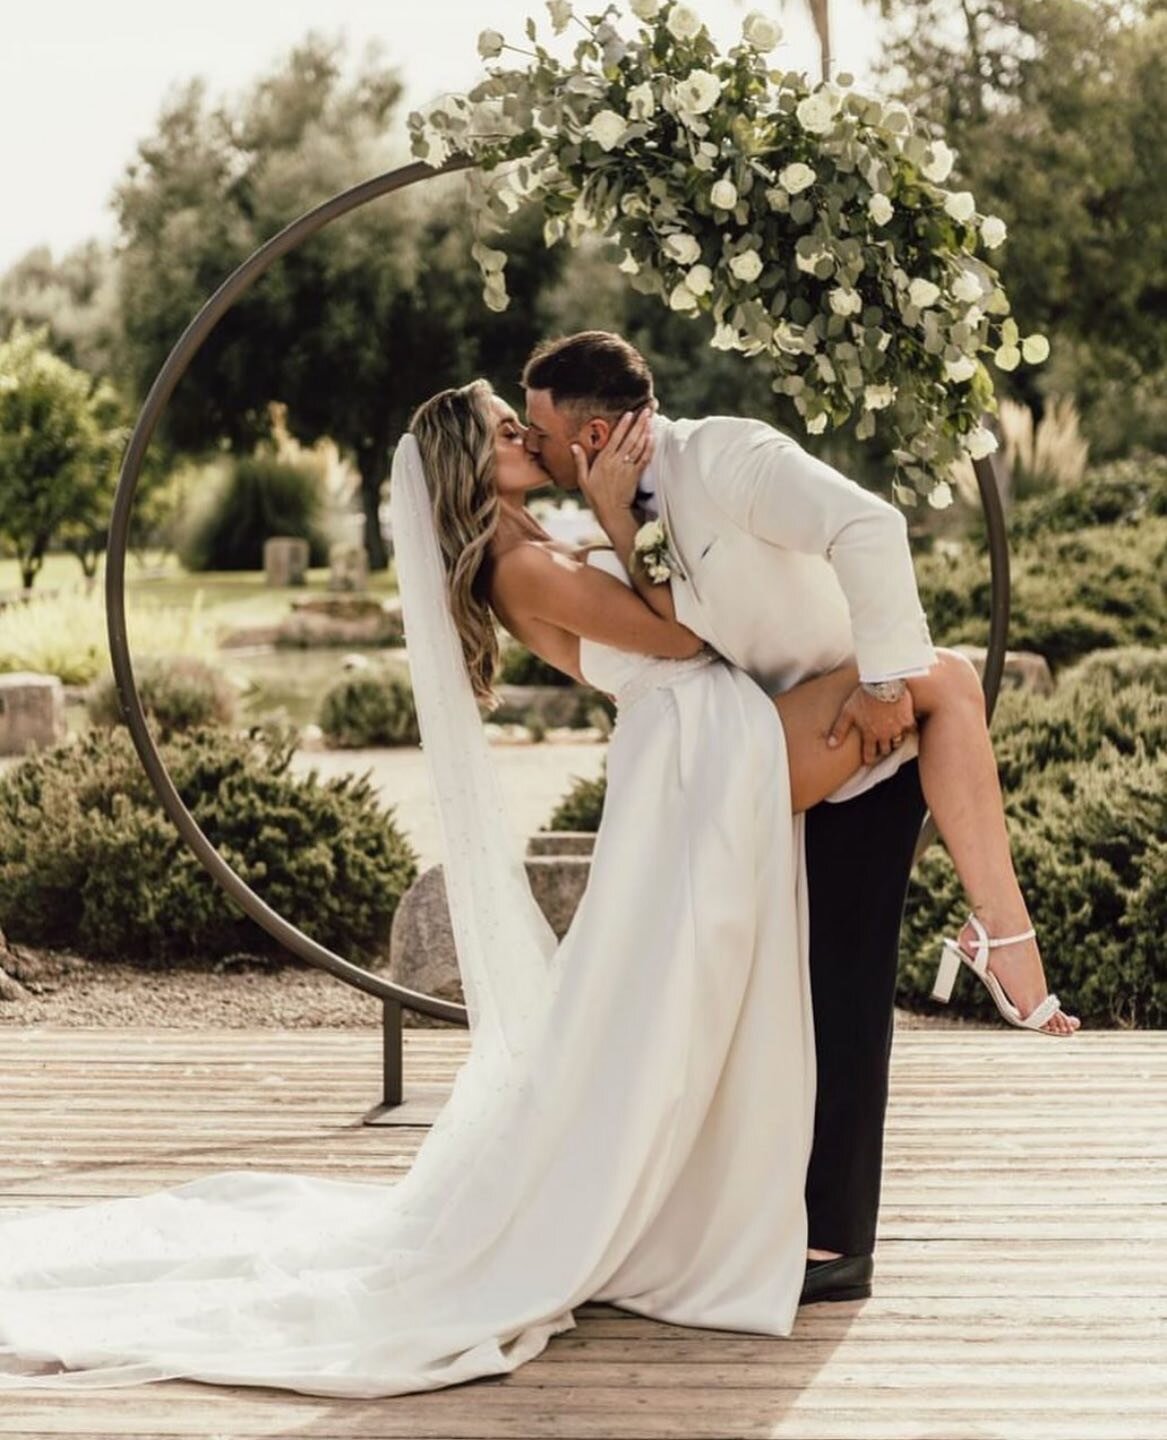 Congratulations to the new Mr and Mrs George Parry @elizabethparry07 and @pepeparry who celebrated their stunning wedding @Finca_morneta this week 💍❤️

It was an honour to create the ceremony script for these two beautiful souls. Wishing them much h